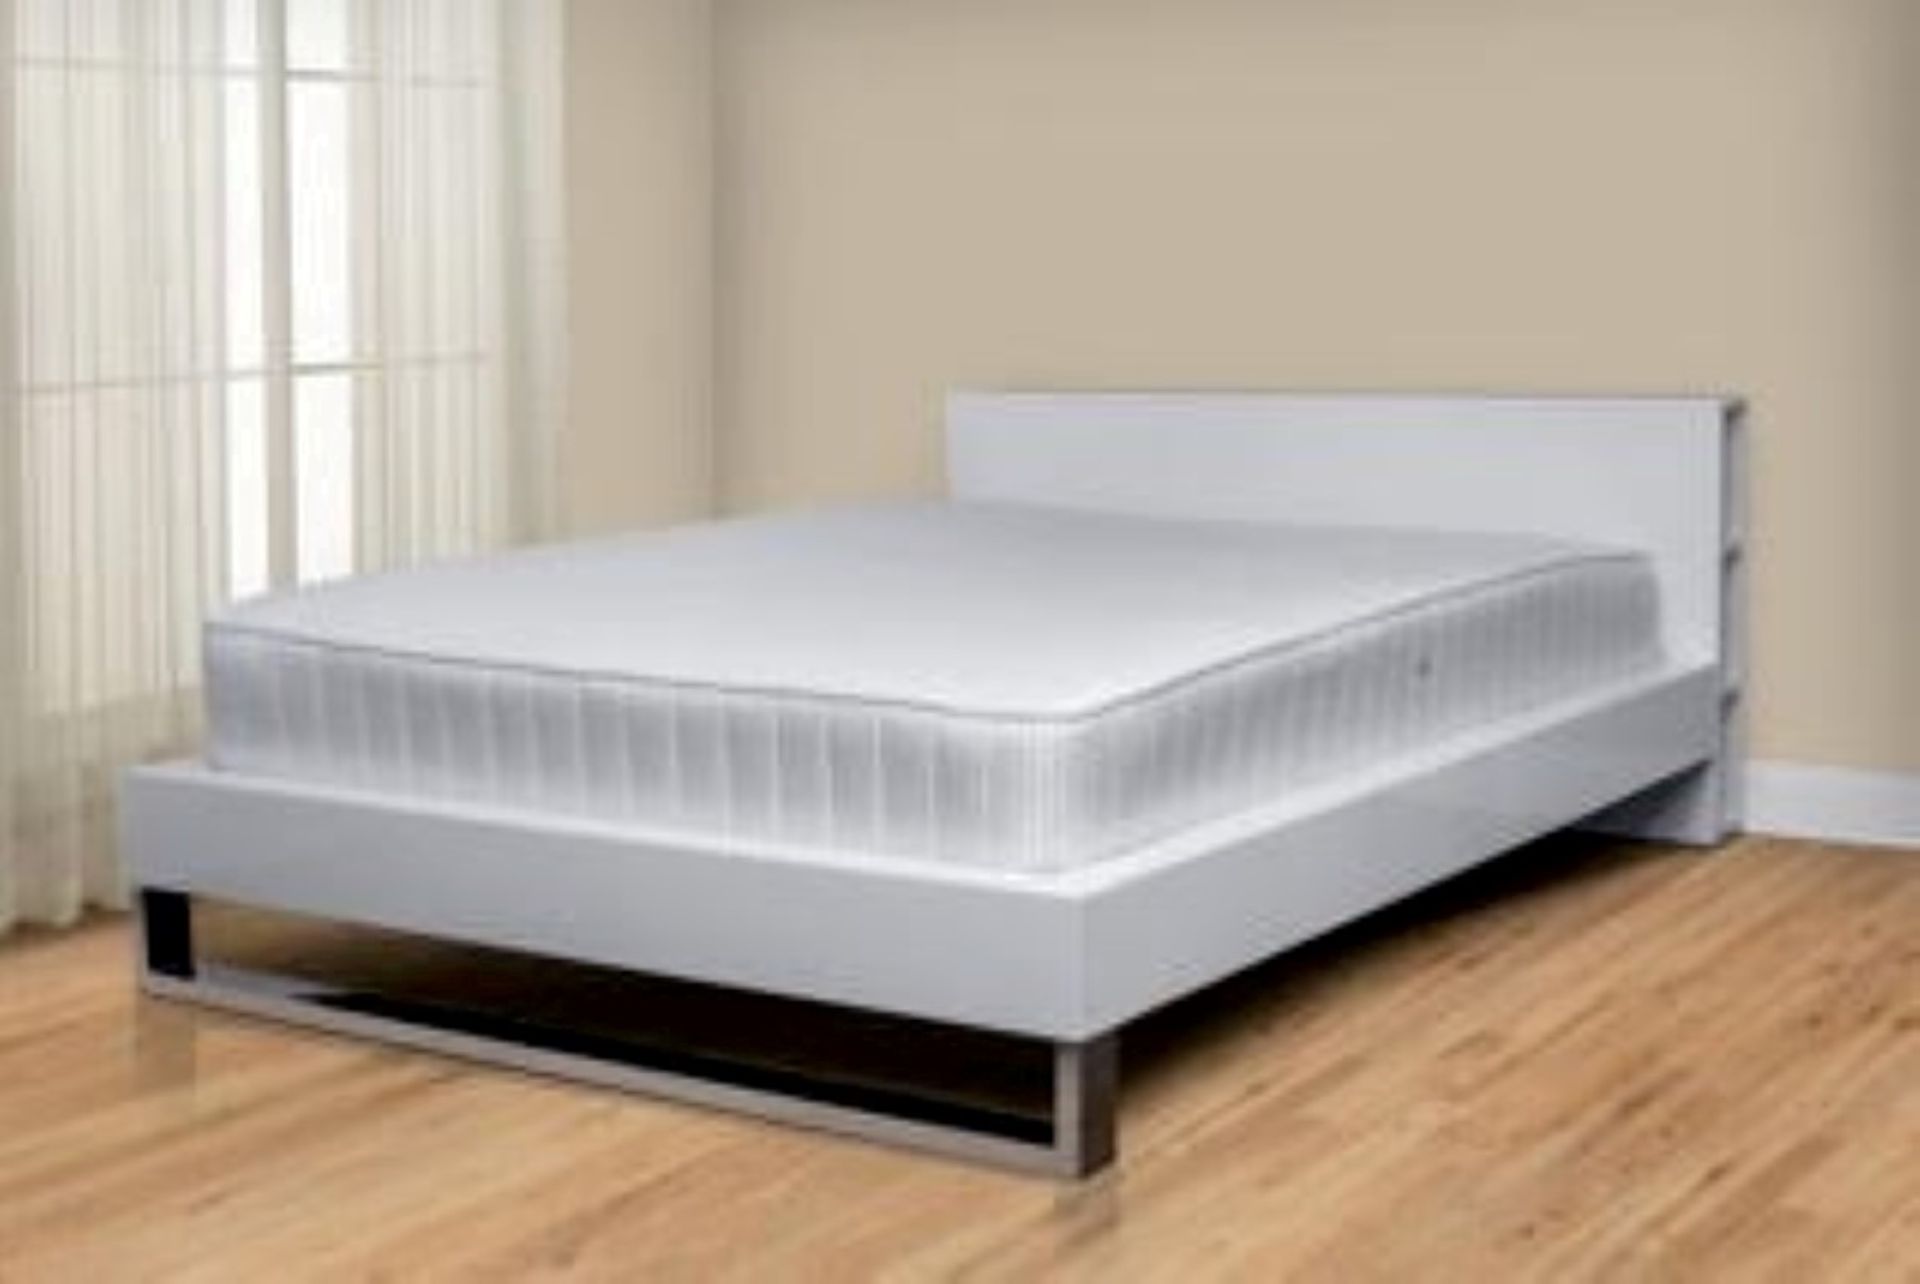 Tenzo Scala Designer 4ft6” Double Bed With Storage Headboard - White Gloss & Chrome - Brand New & - Image 2 of 5